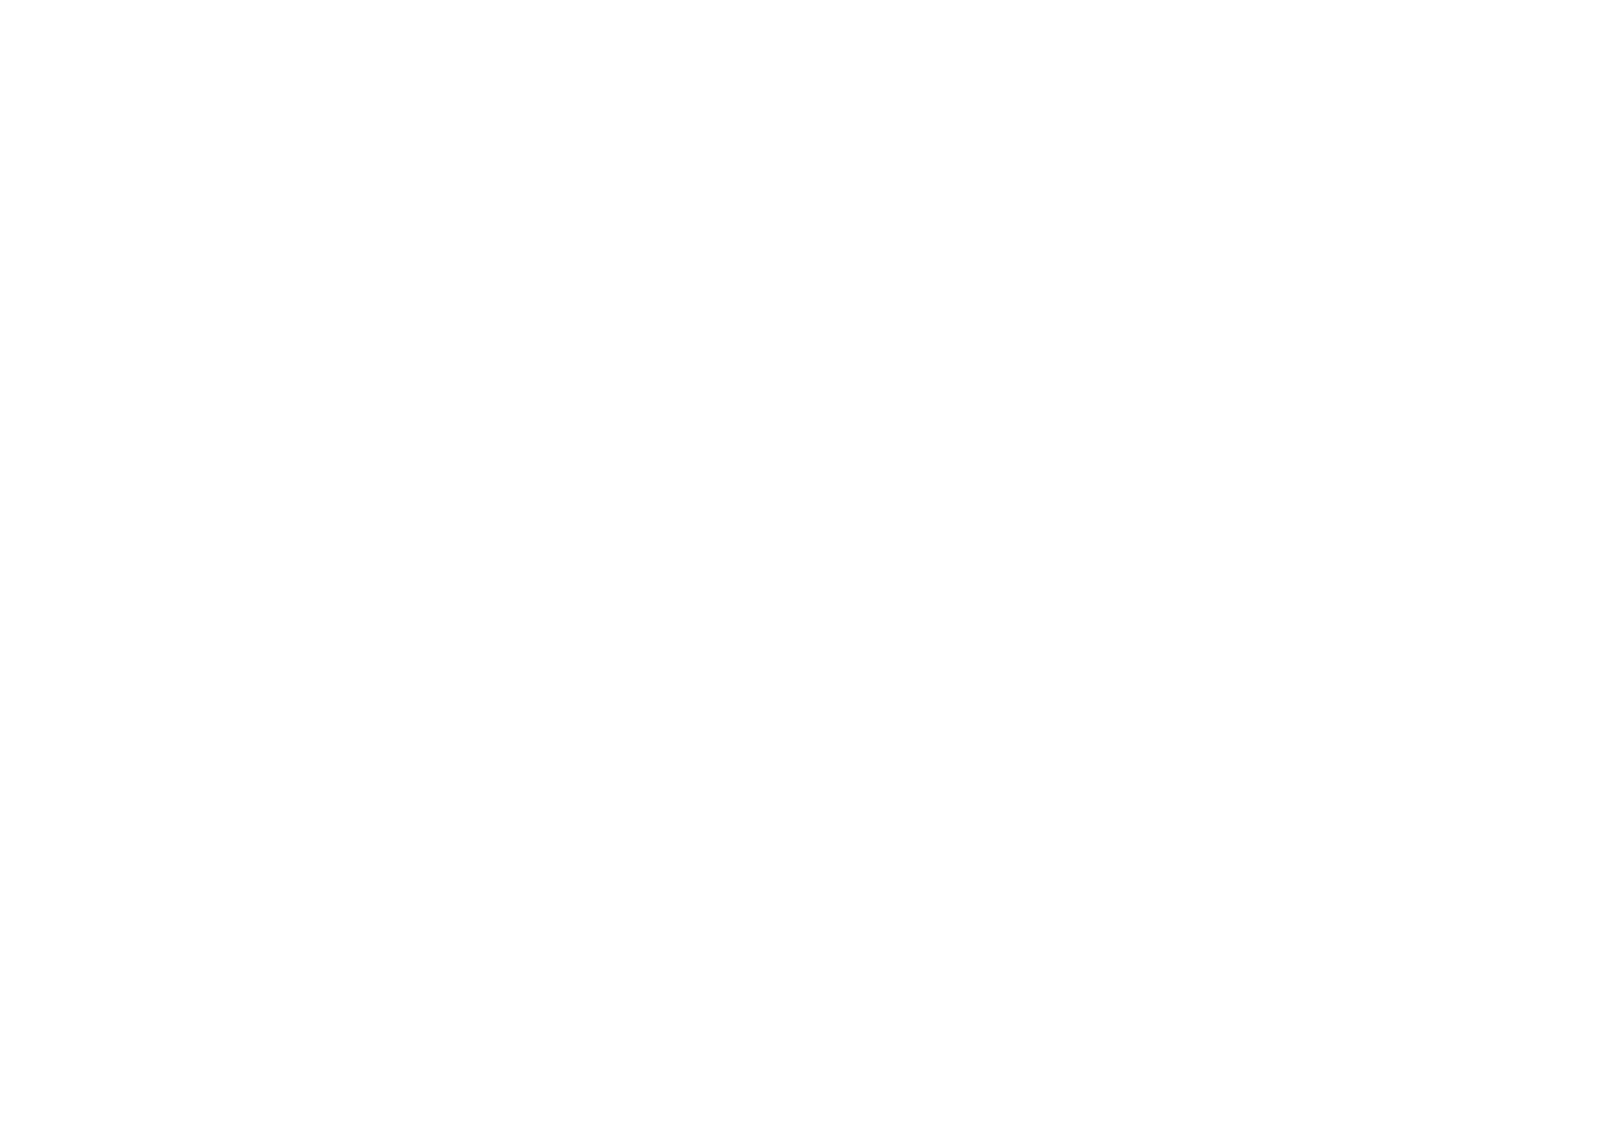 The Vita Coco Company logo large for dark backgrounds (transparent PNG)